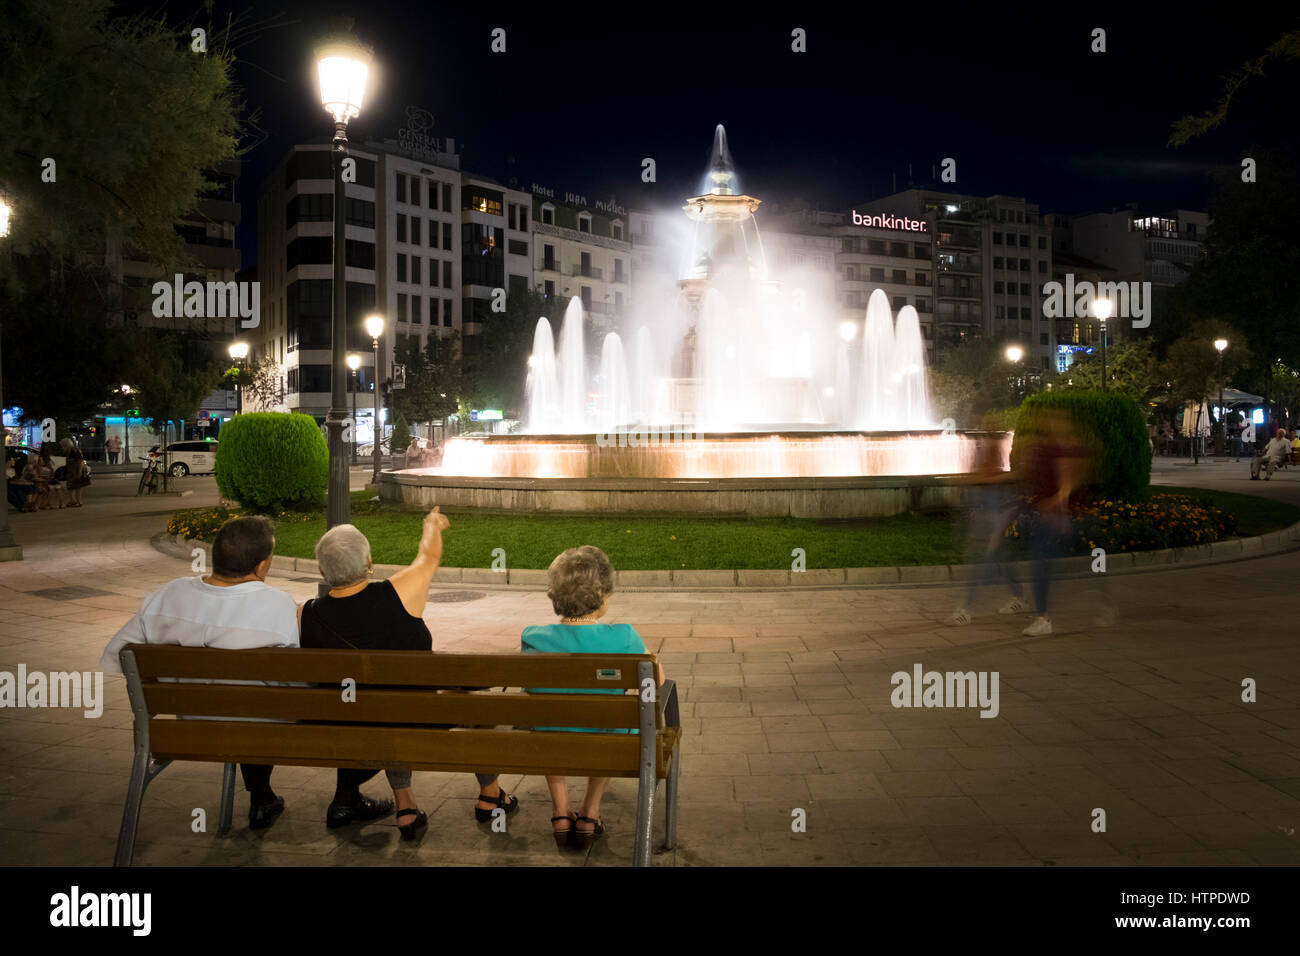 Three older people sit on a bench back to camera looking at the illuminated fountain in the Plaza del Campilo on a summer evening in Granada Spain Stock Photo